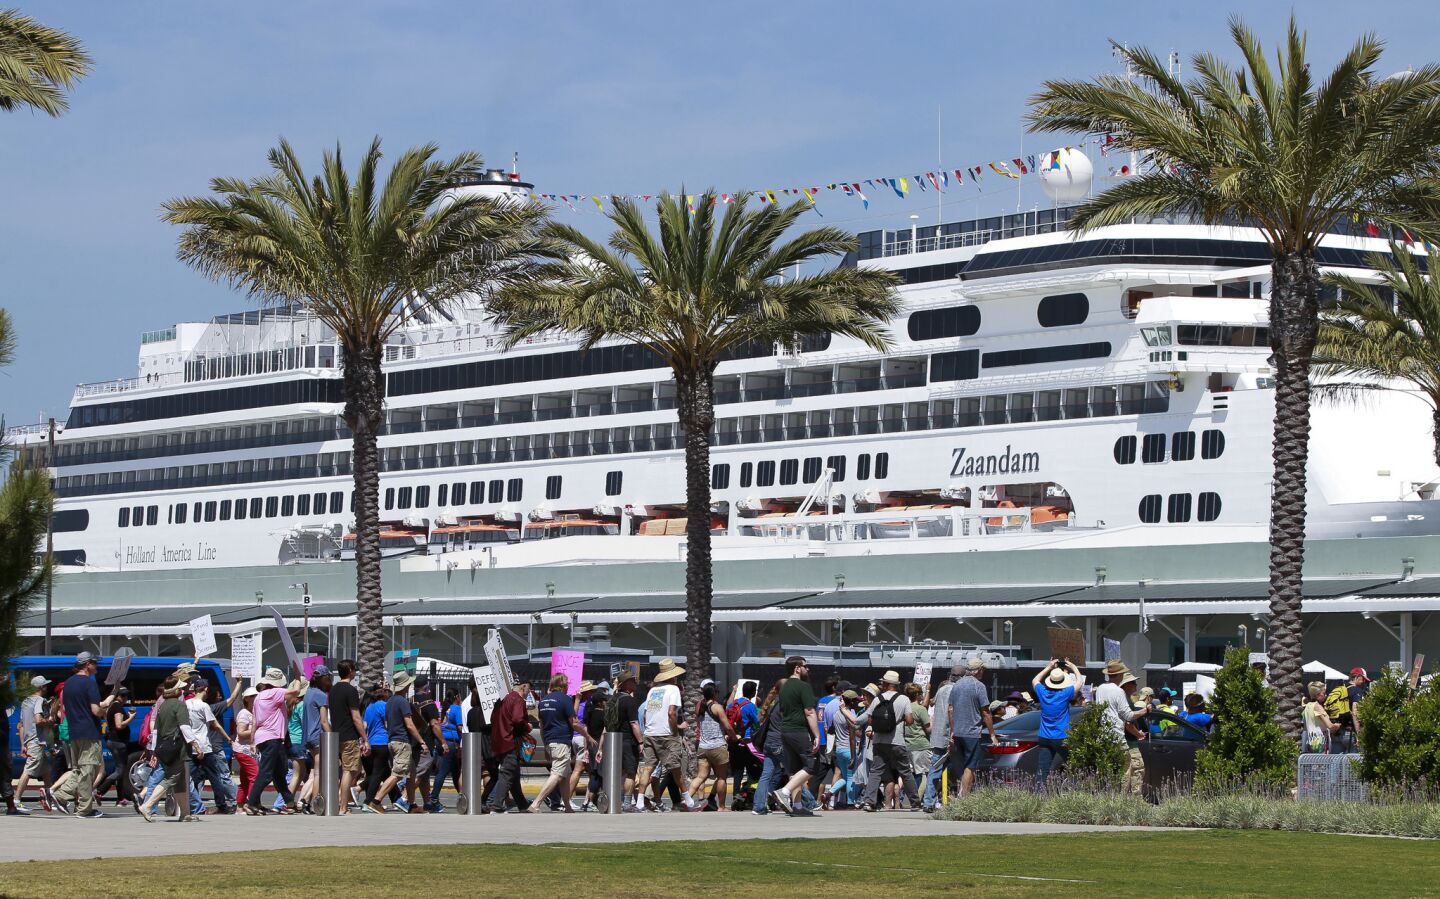 People participating in the March for Science walk past a docked cruise ship on North Harbor Drive.